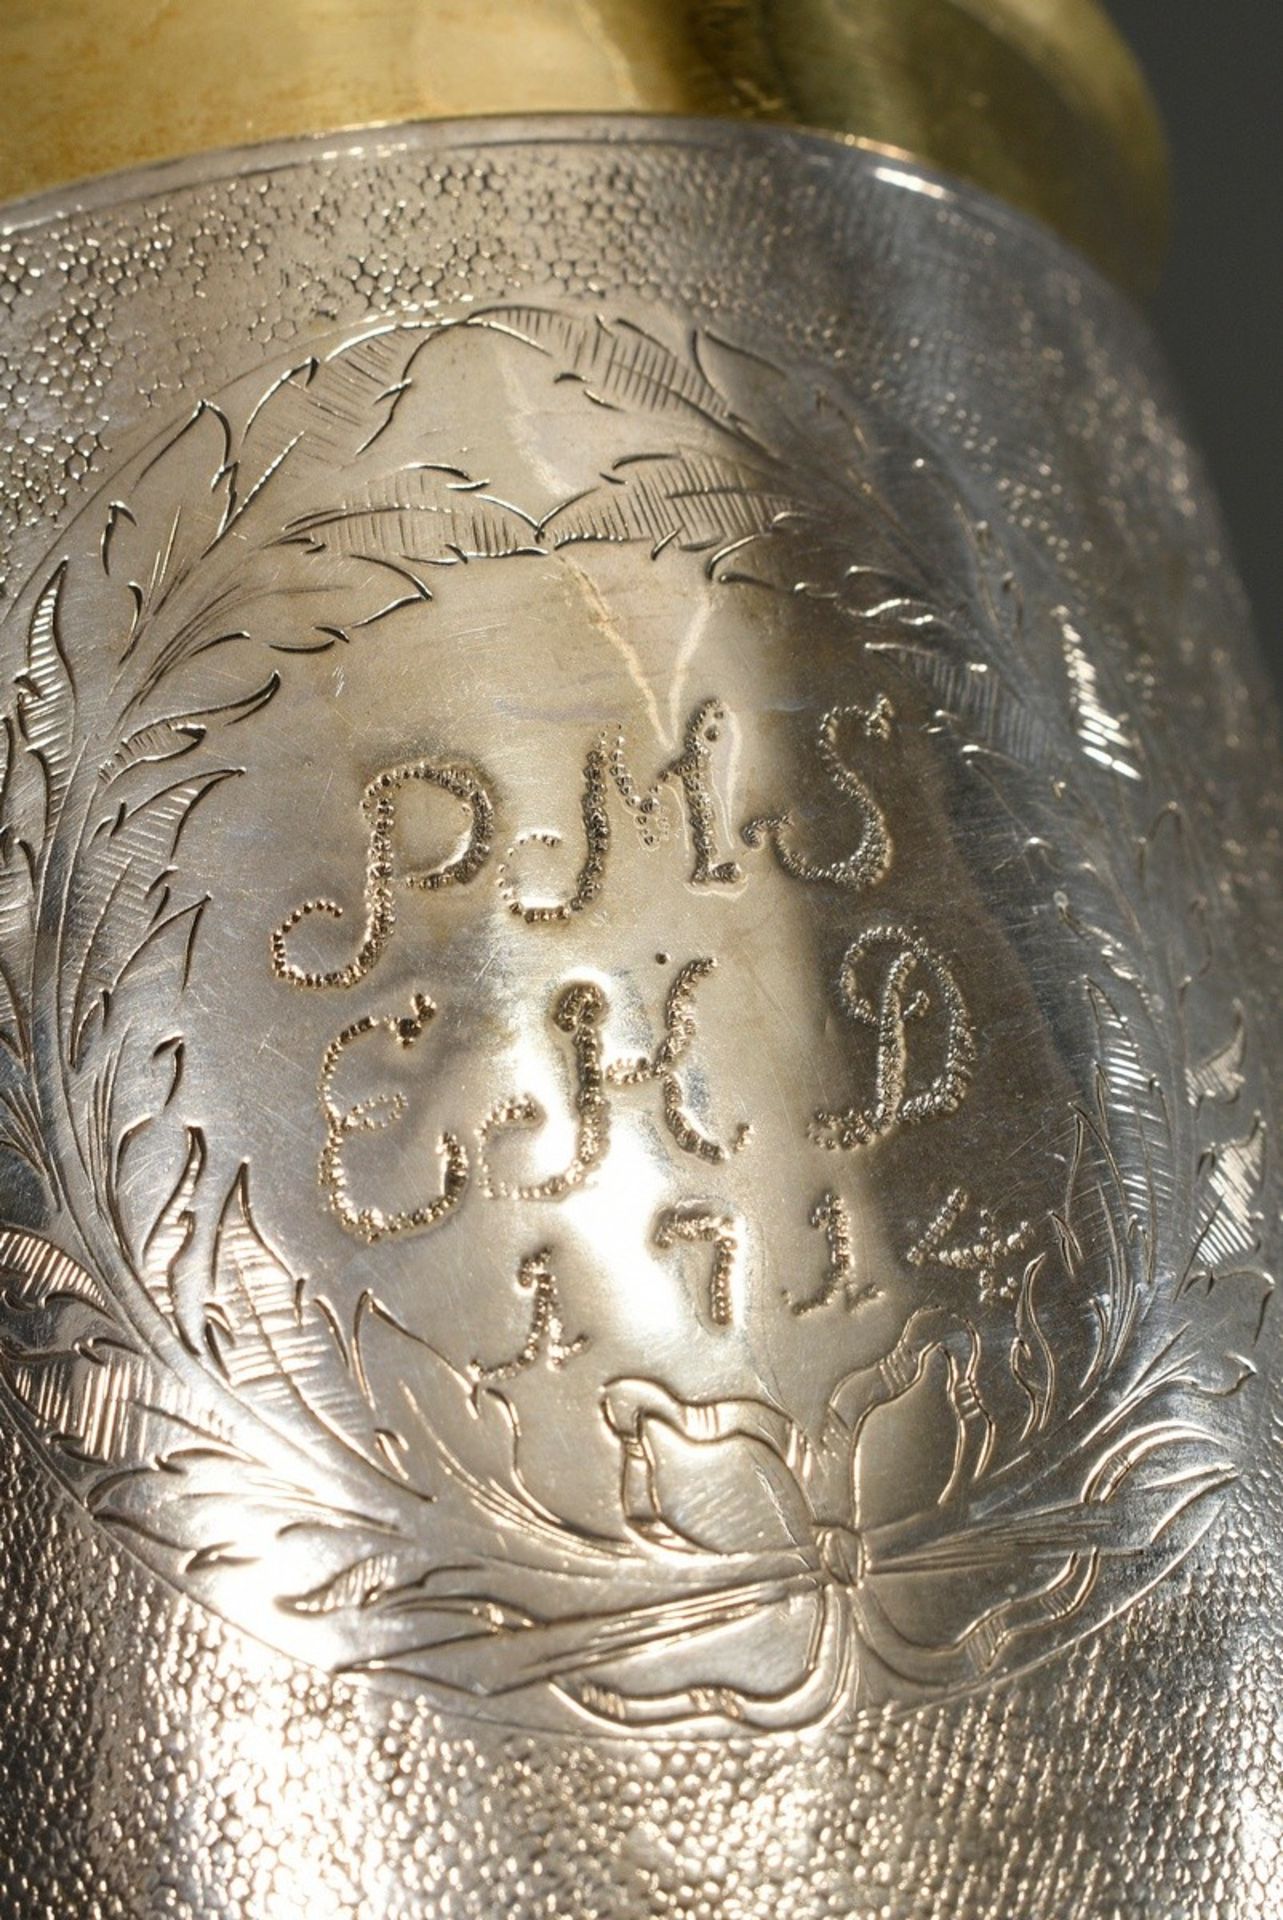 A twisted snakeskin cup with vermeil rim and engraved foliate cartouche "PMS EKD 1714", MM: Thomas  - Image 2 of 5